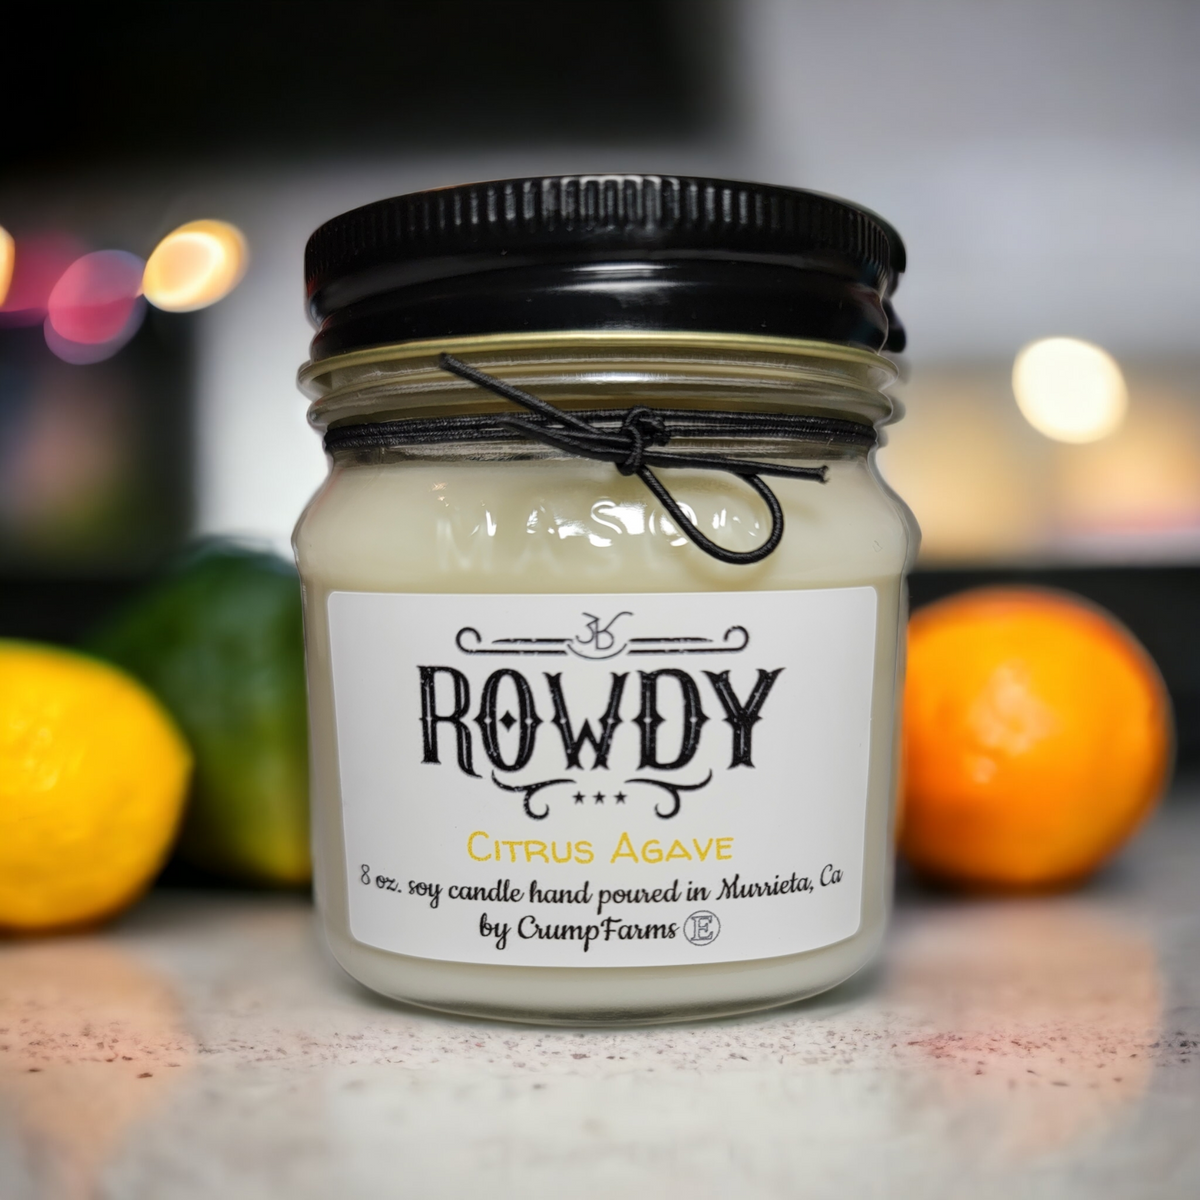 Citrus Agave candle